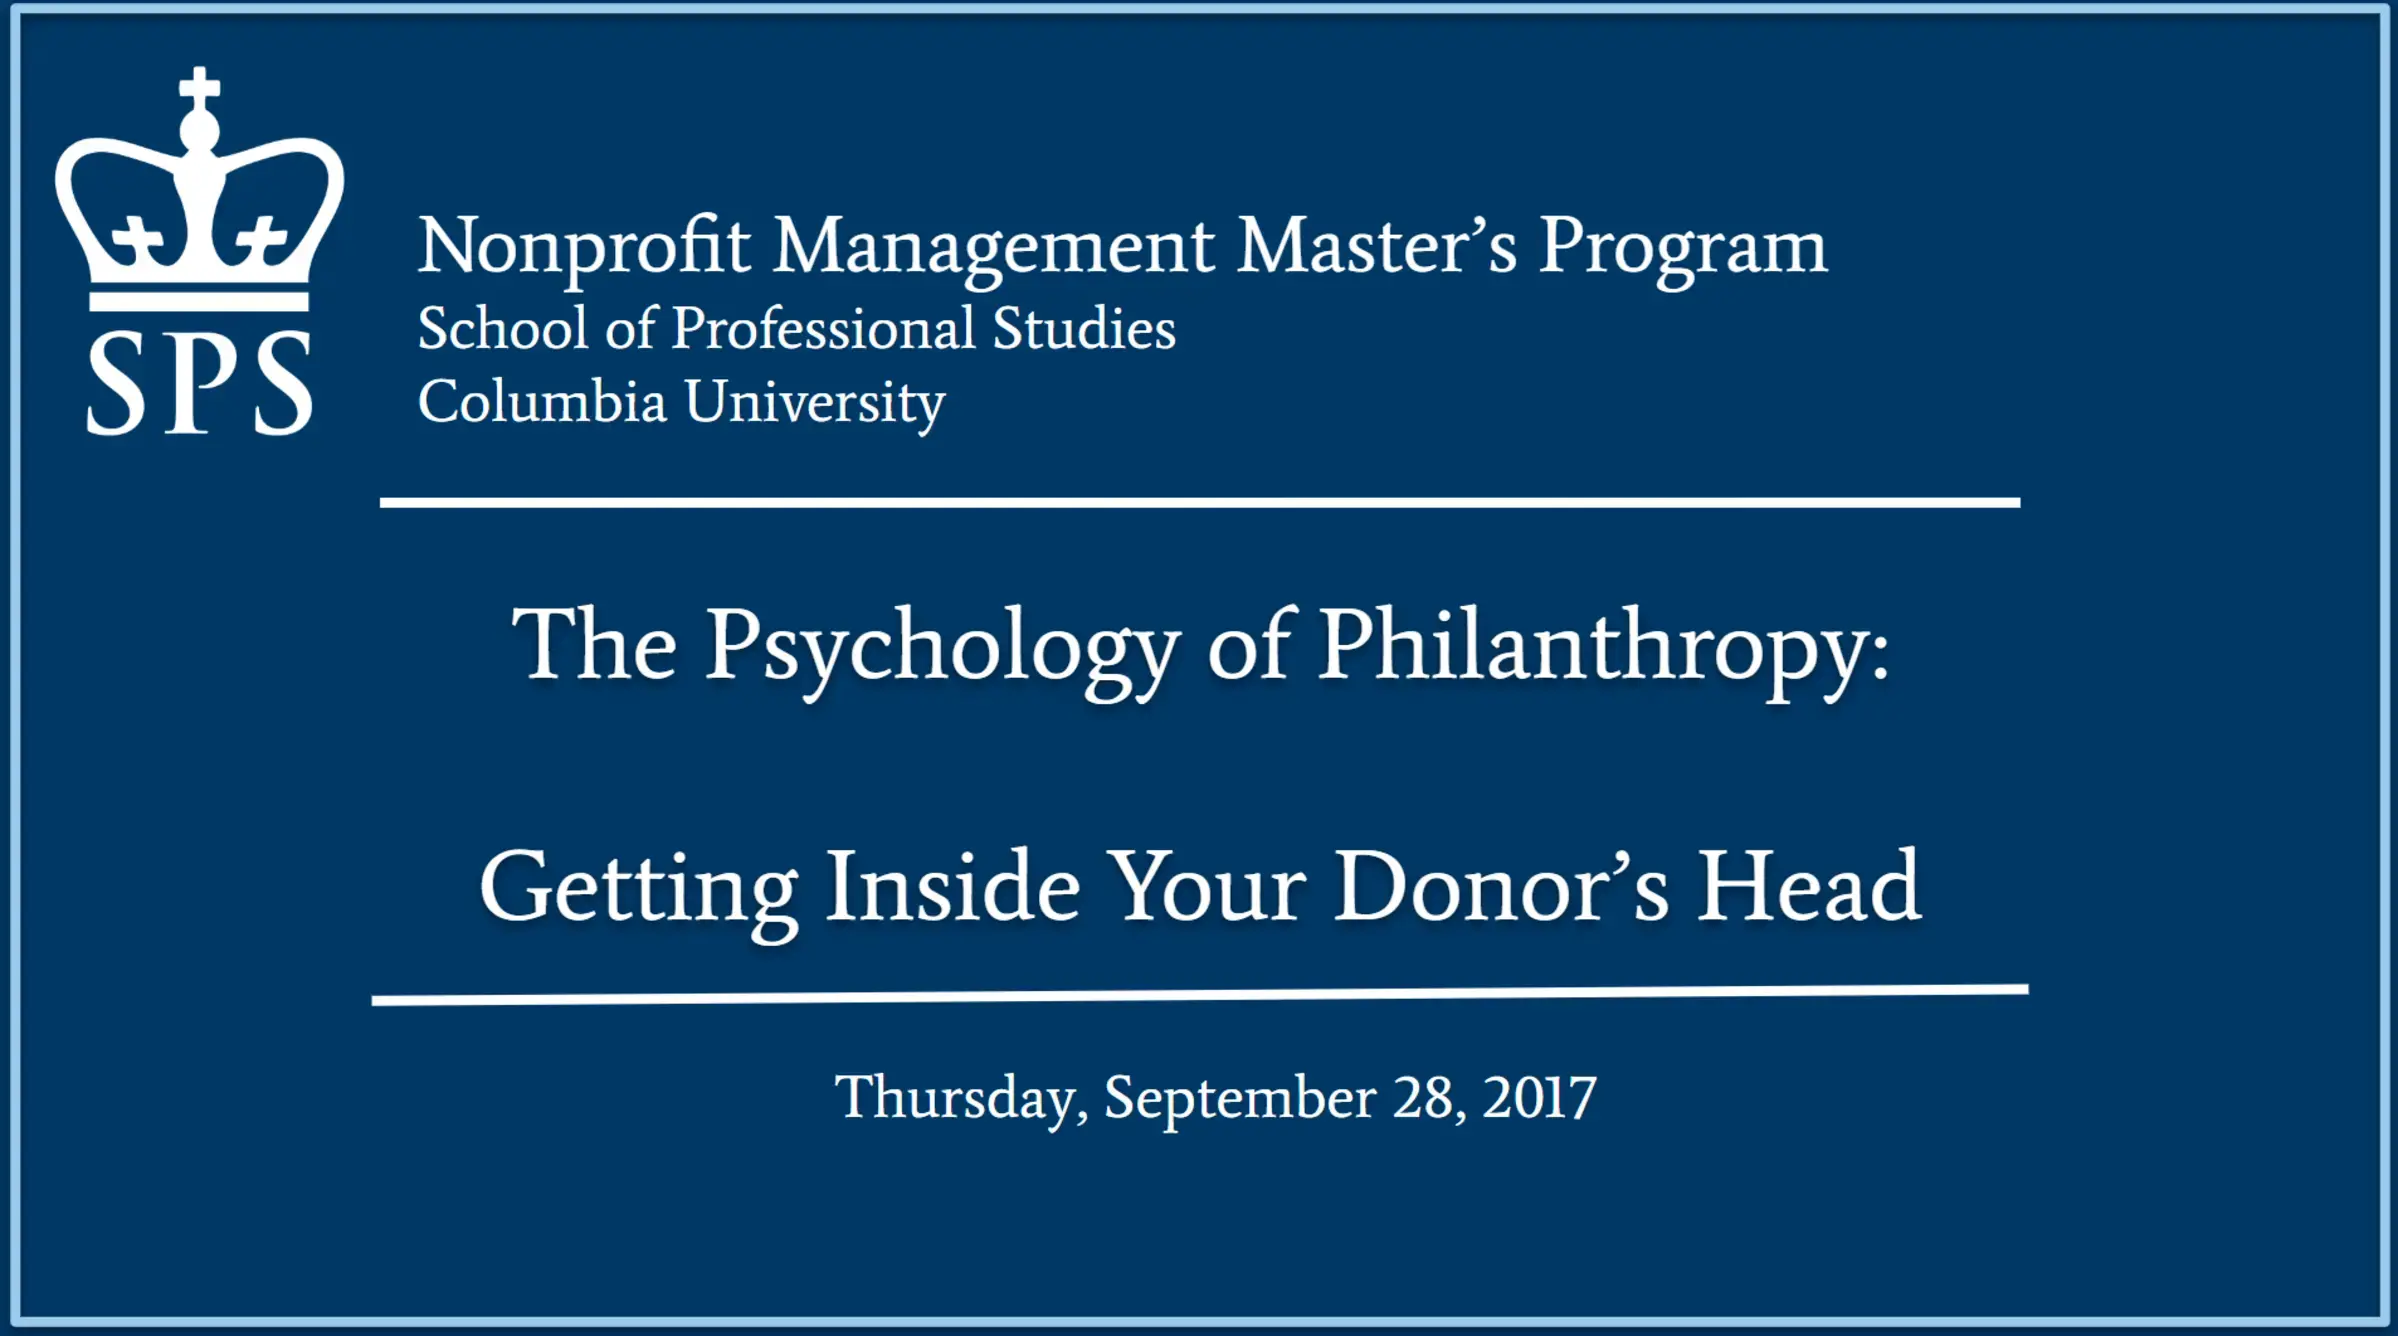 The Psychology of Philanthropy: Getting Inside Your Donor’s Head